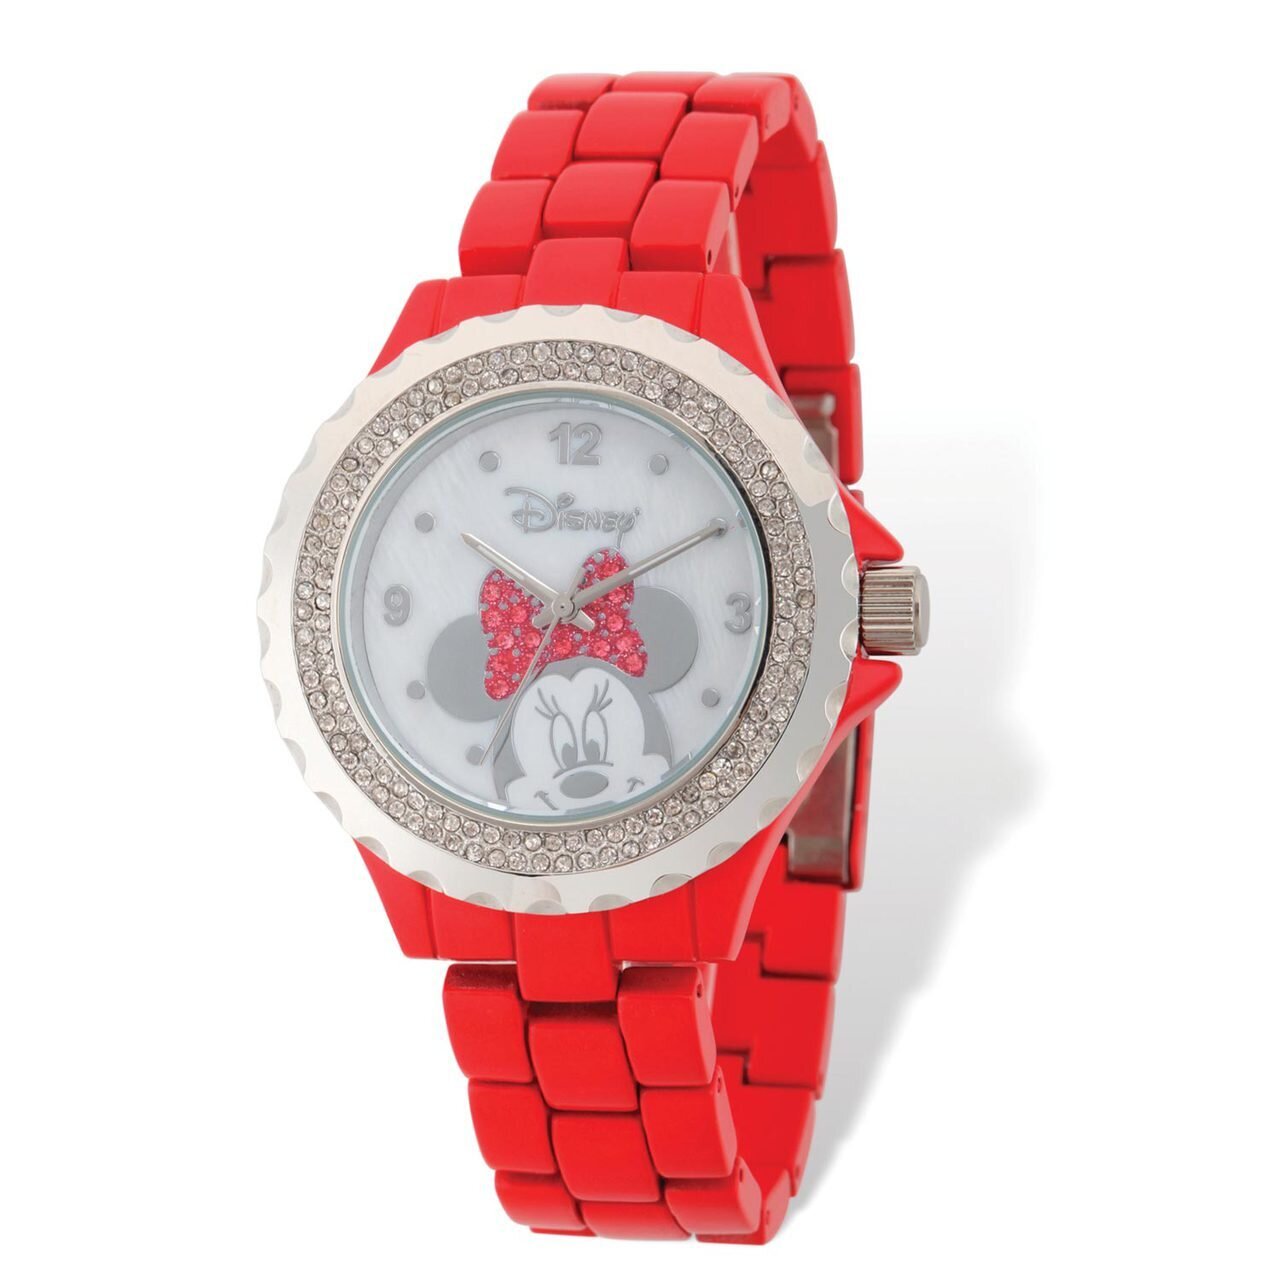 Disney Minnie Mouse Bow Red Band Watch Adult Size XWA5391